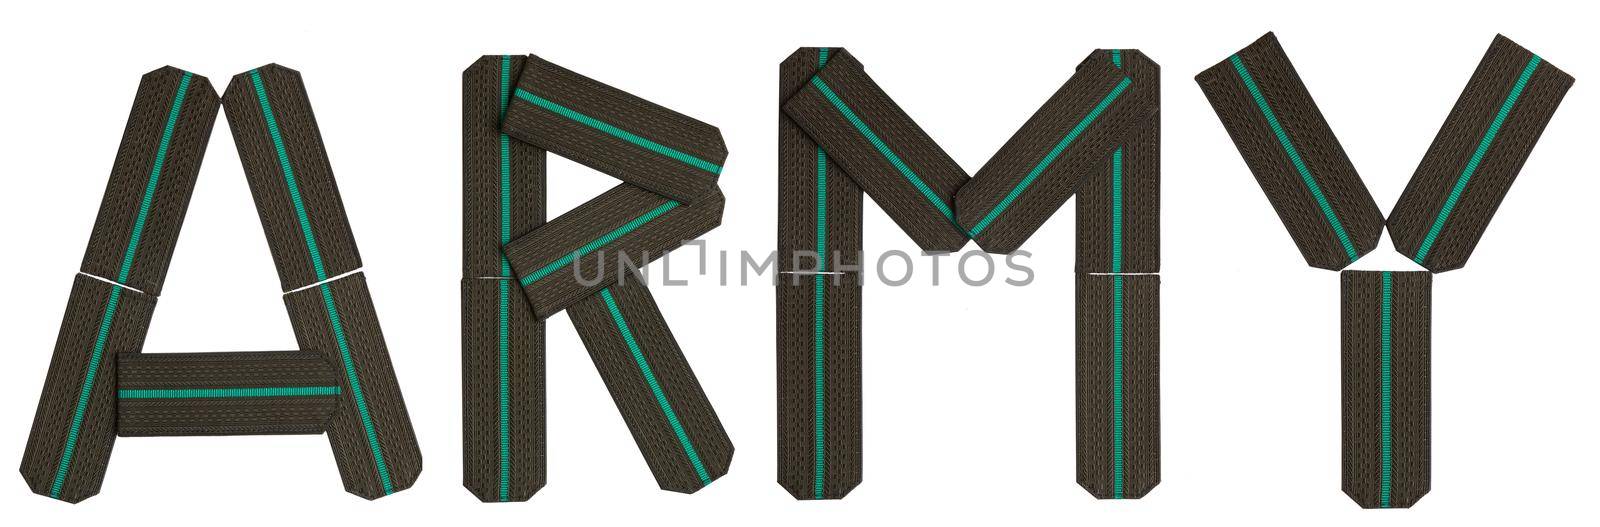 Word ARMY epaulets compound green letters military